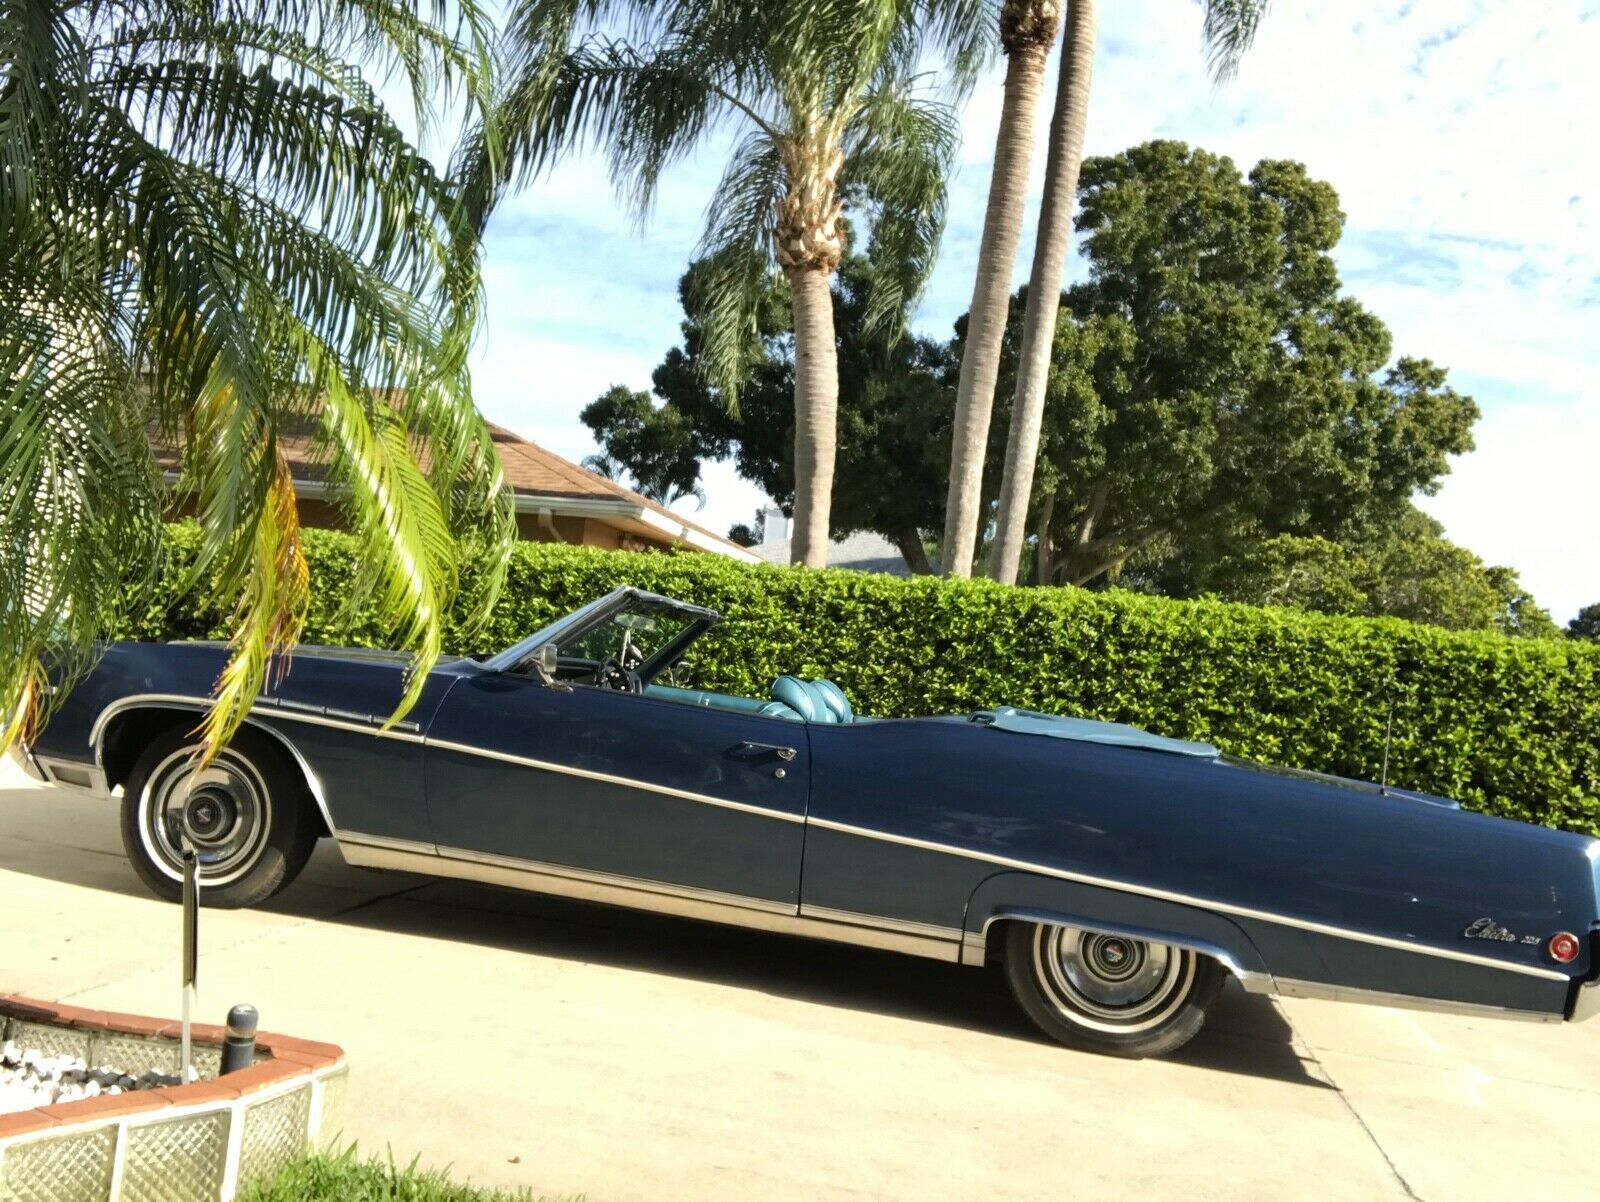 1969 Buick Electra 225 Chrome 1969 Buick Electra 225 Convertible Blue Rwd Automatic Chrome